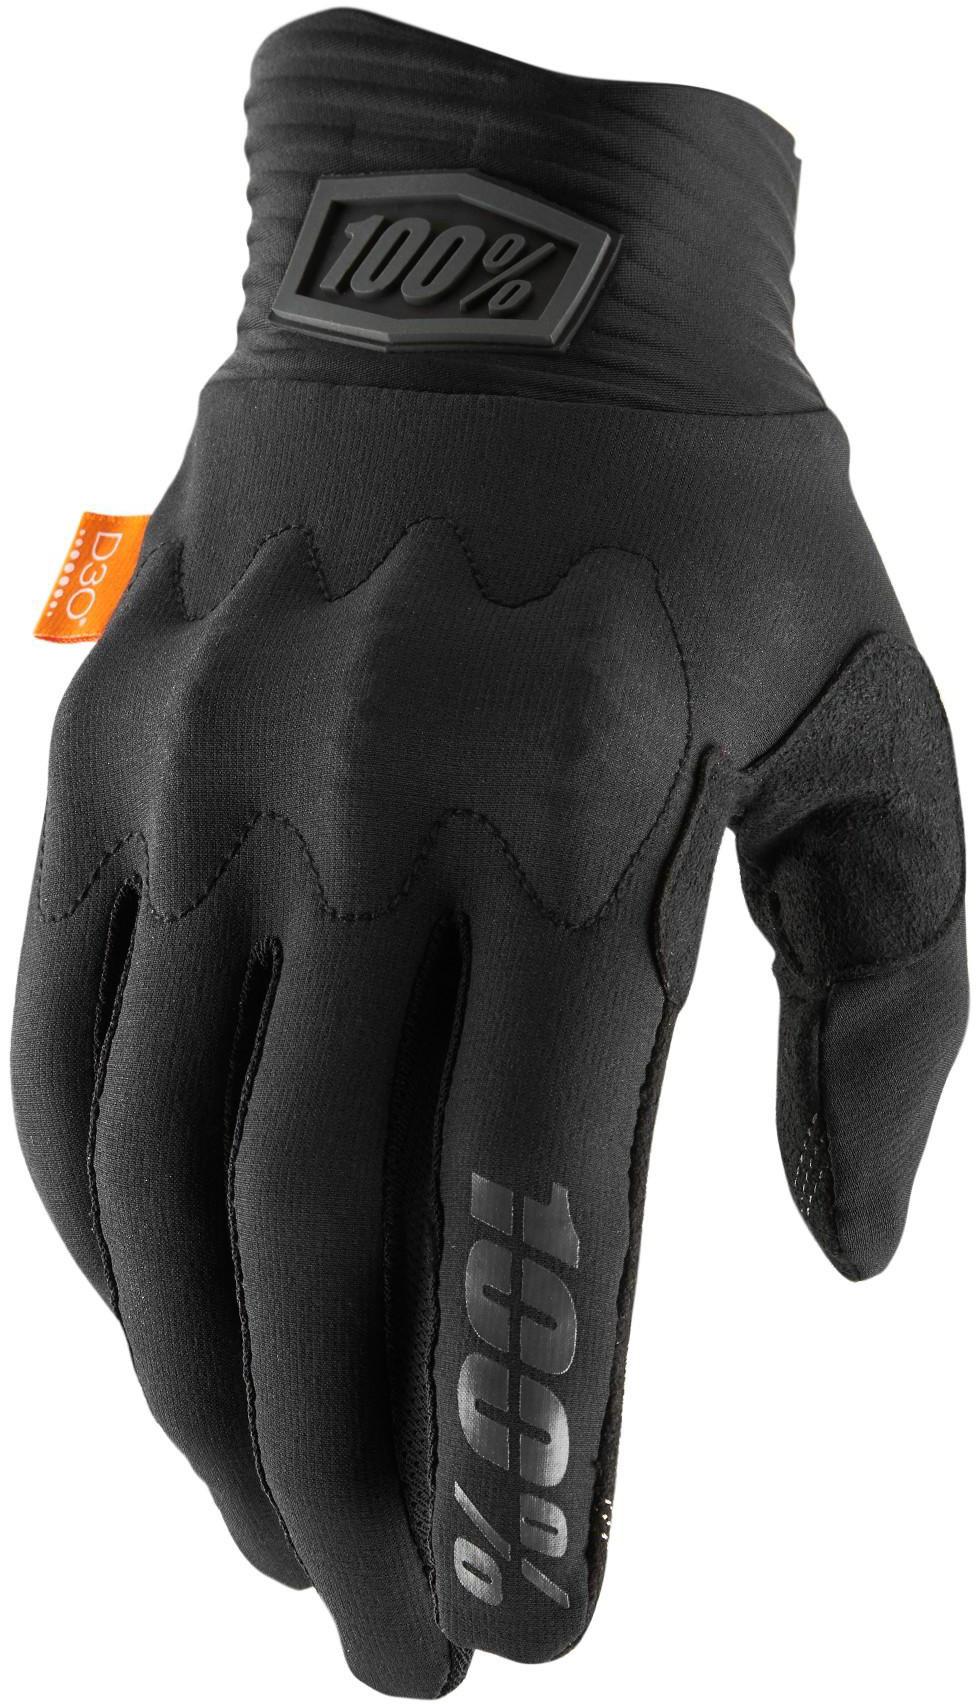 100% Cognito D30 Gloves - Black/charcoal